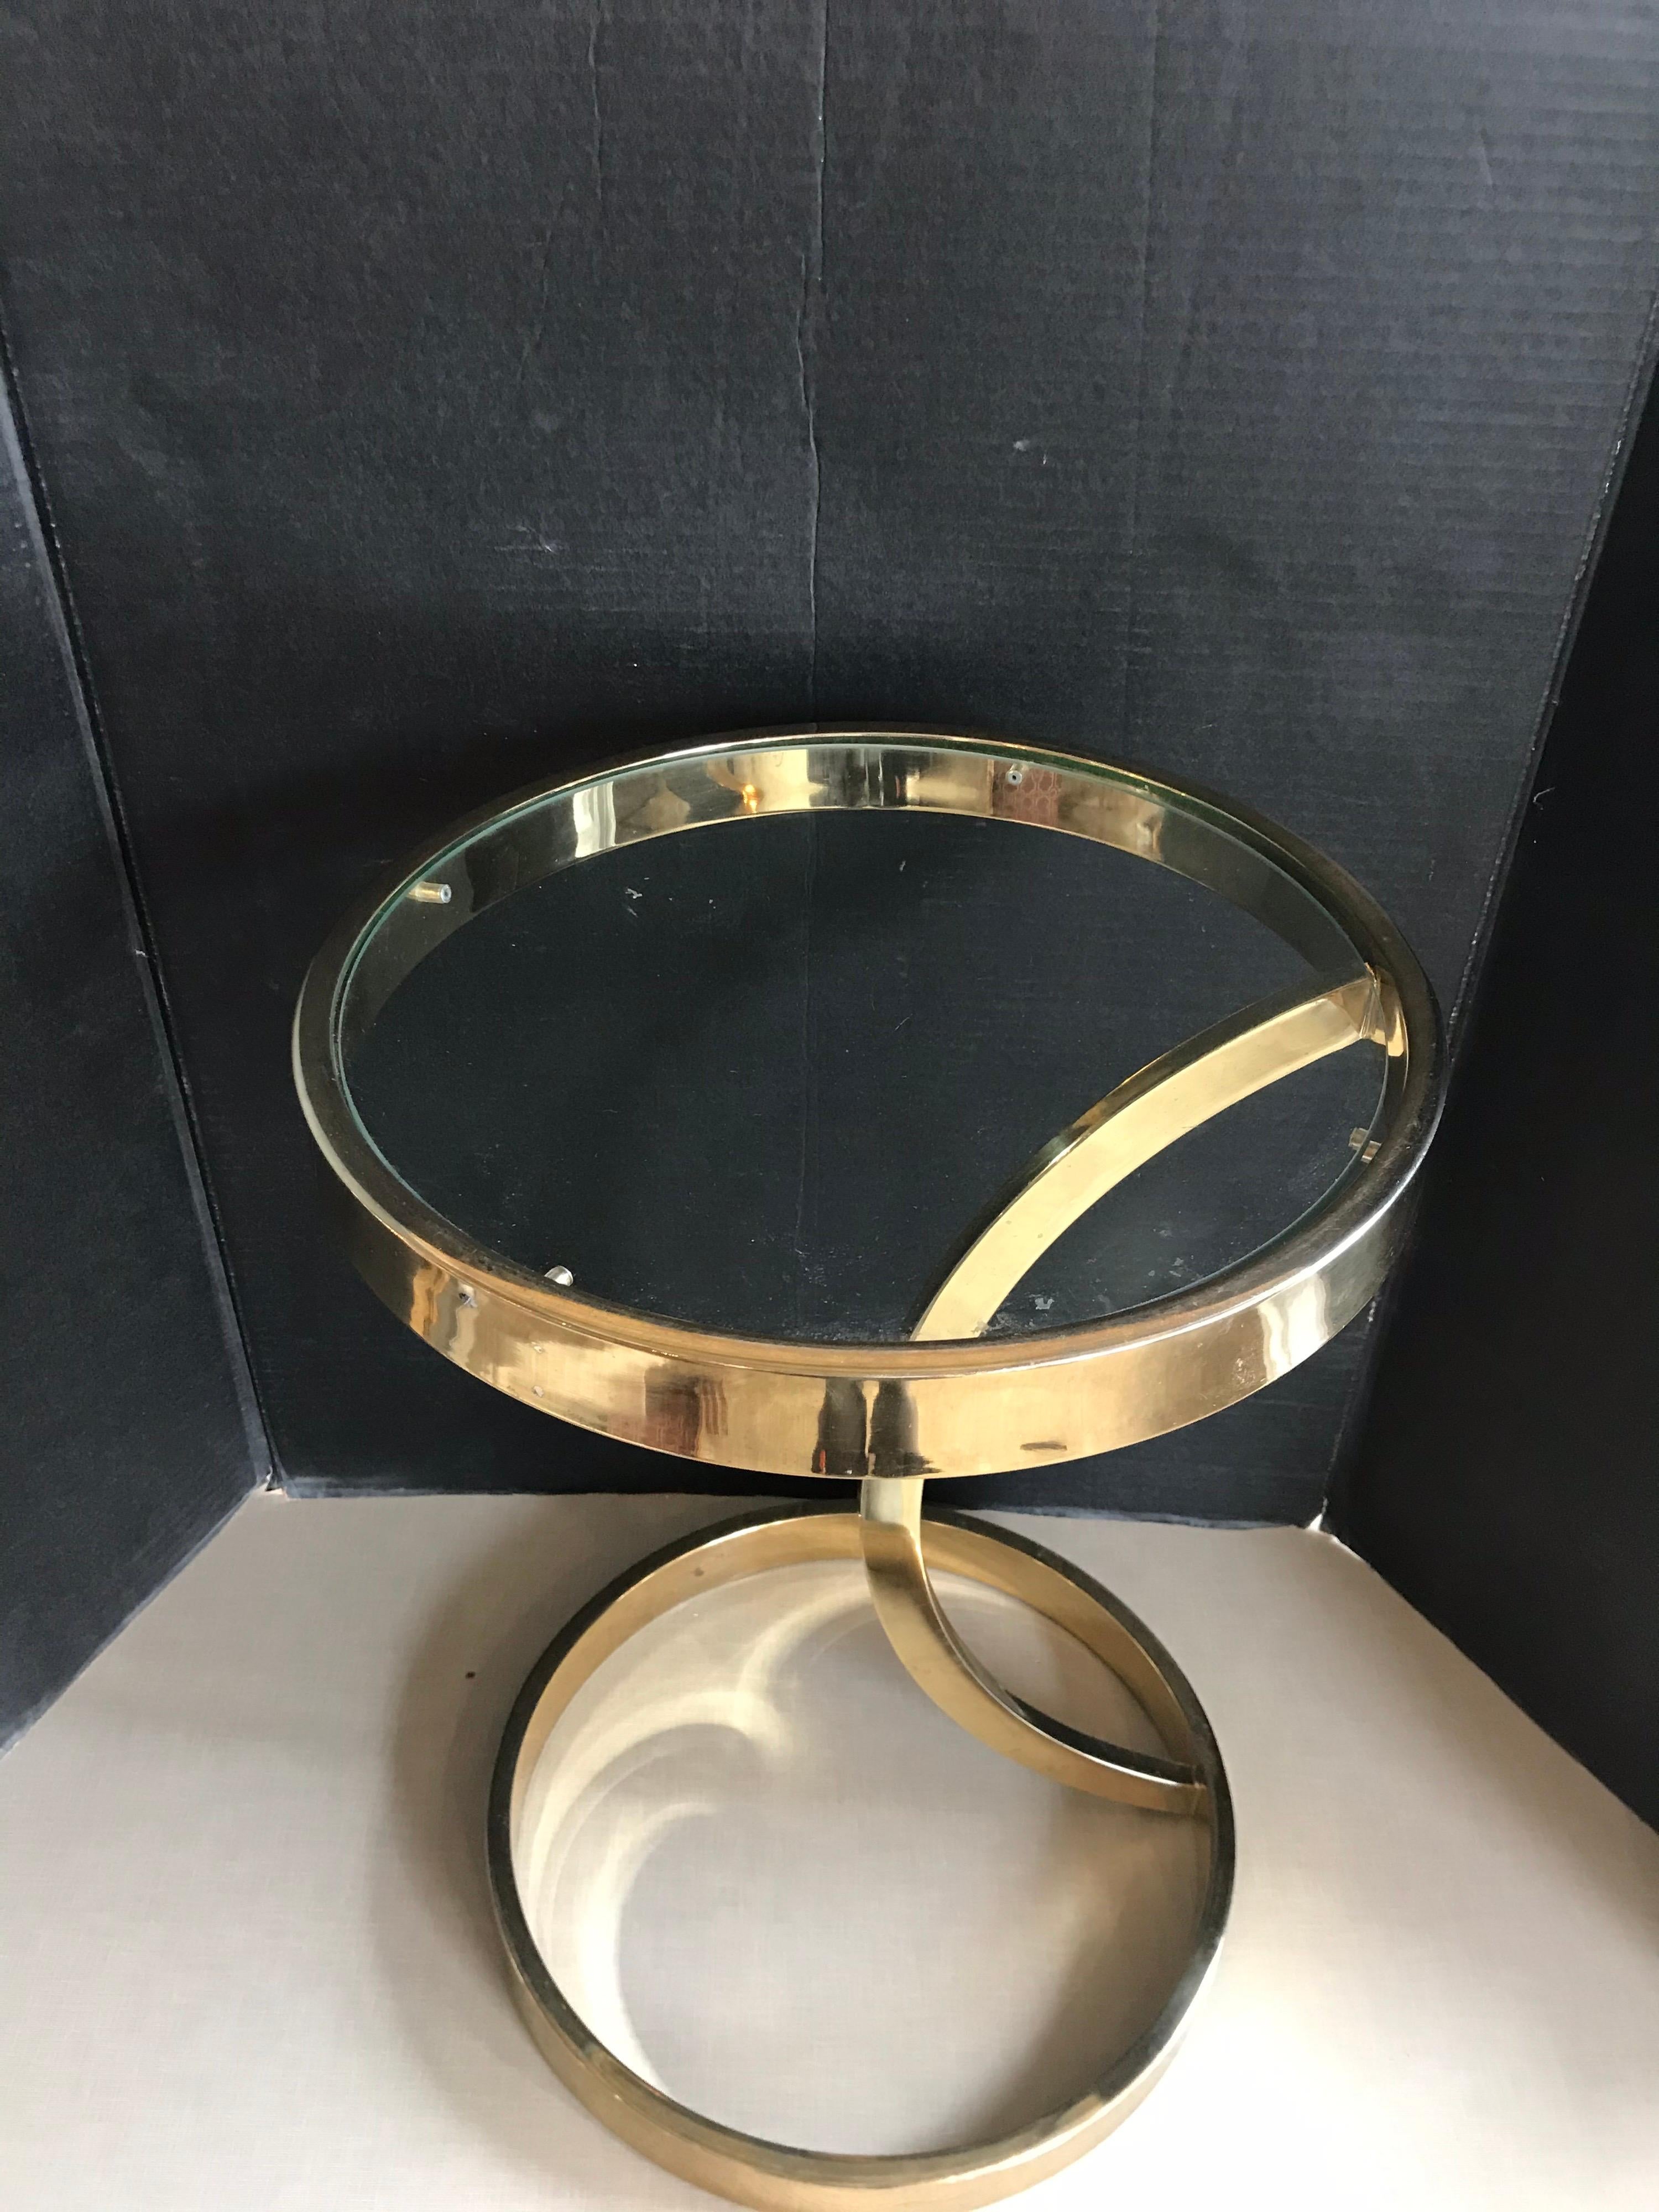 This is a small brass side table with glass top in the style of Milo Baughman from 1970s.